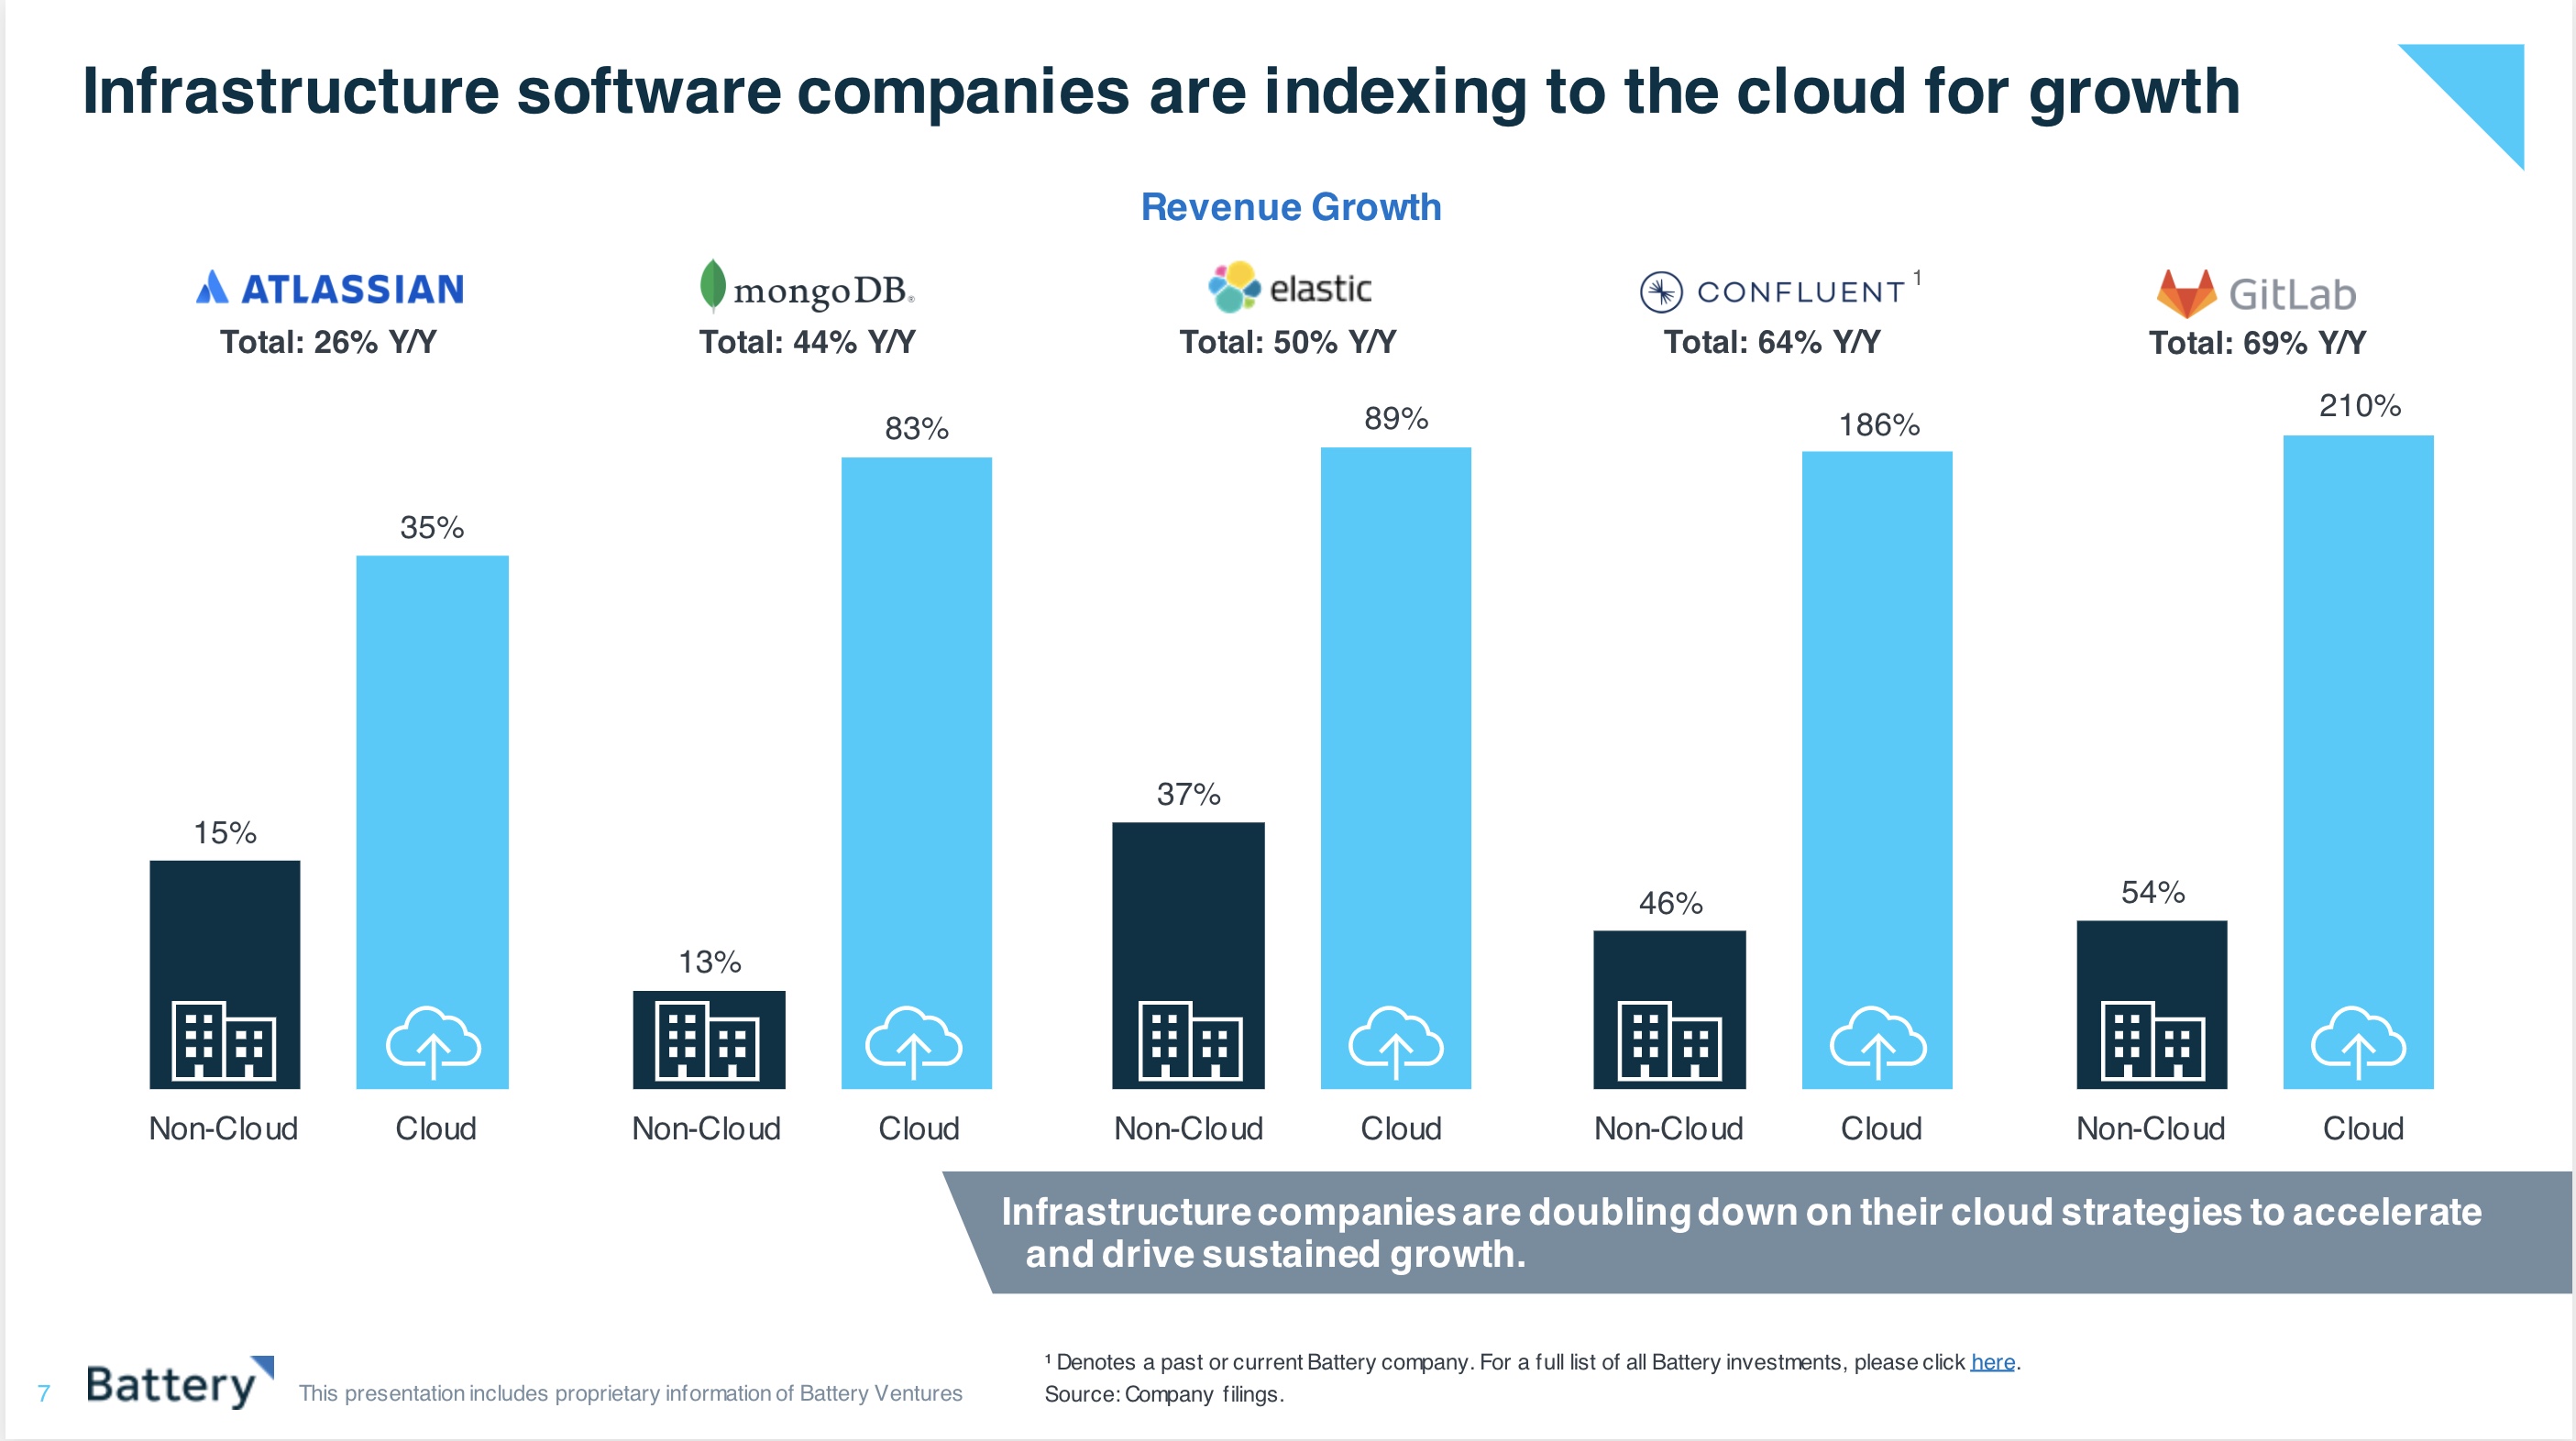 Cloud growth blows away other revenue growth according to research from Battery Ventures.